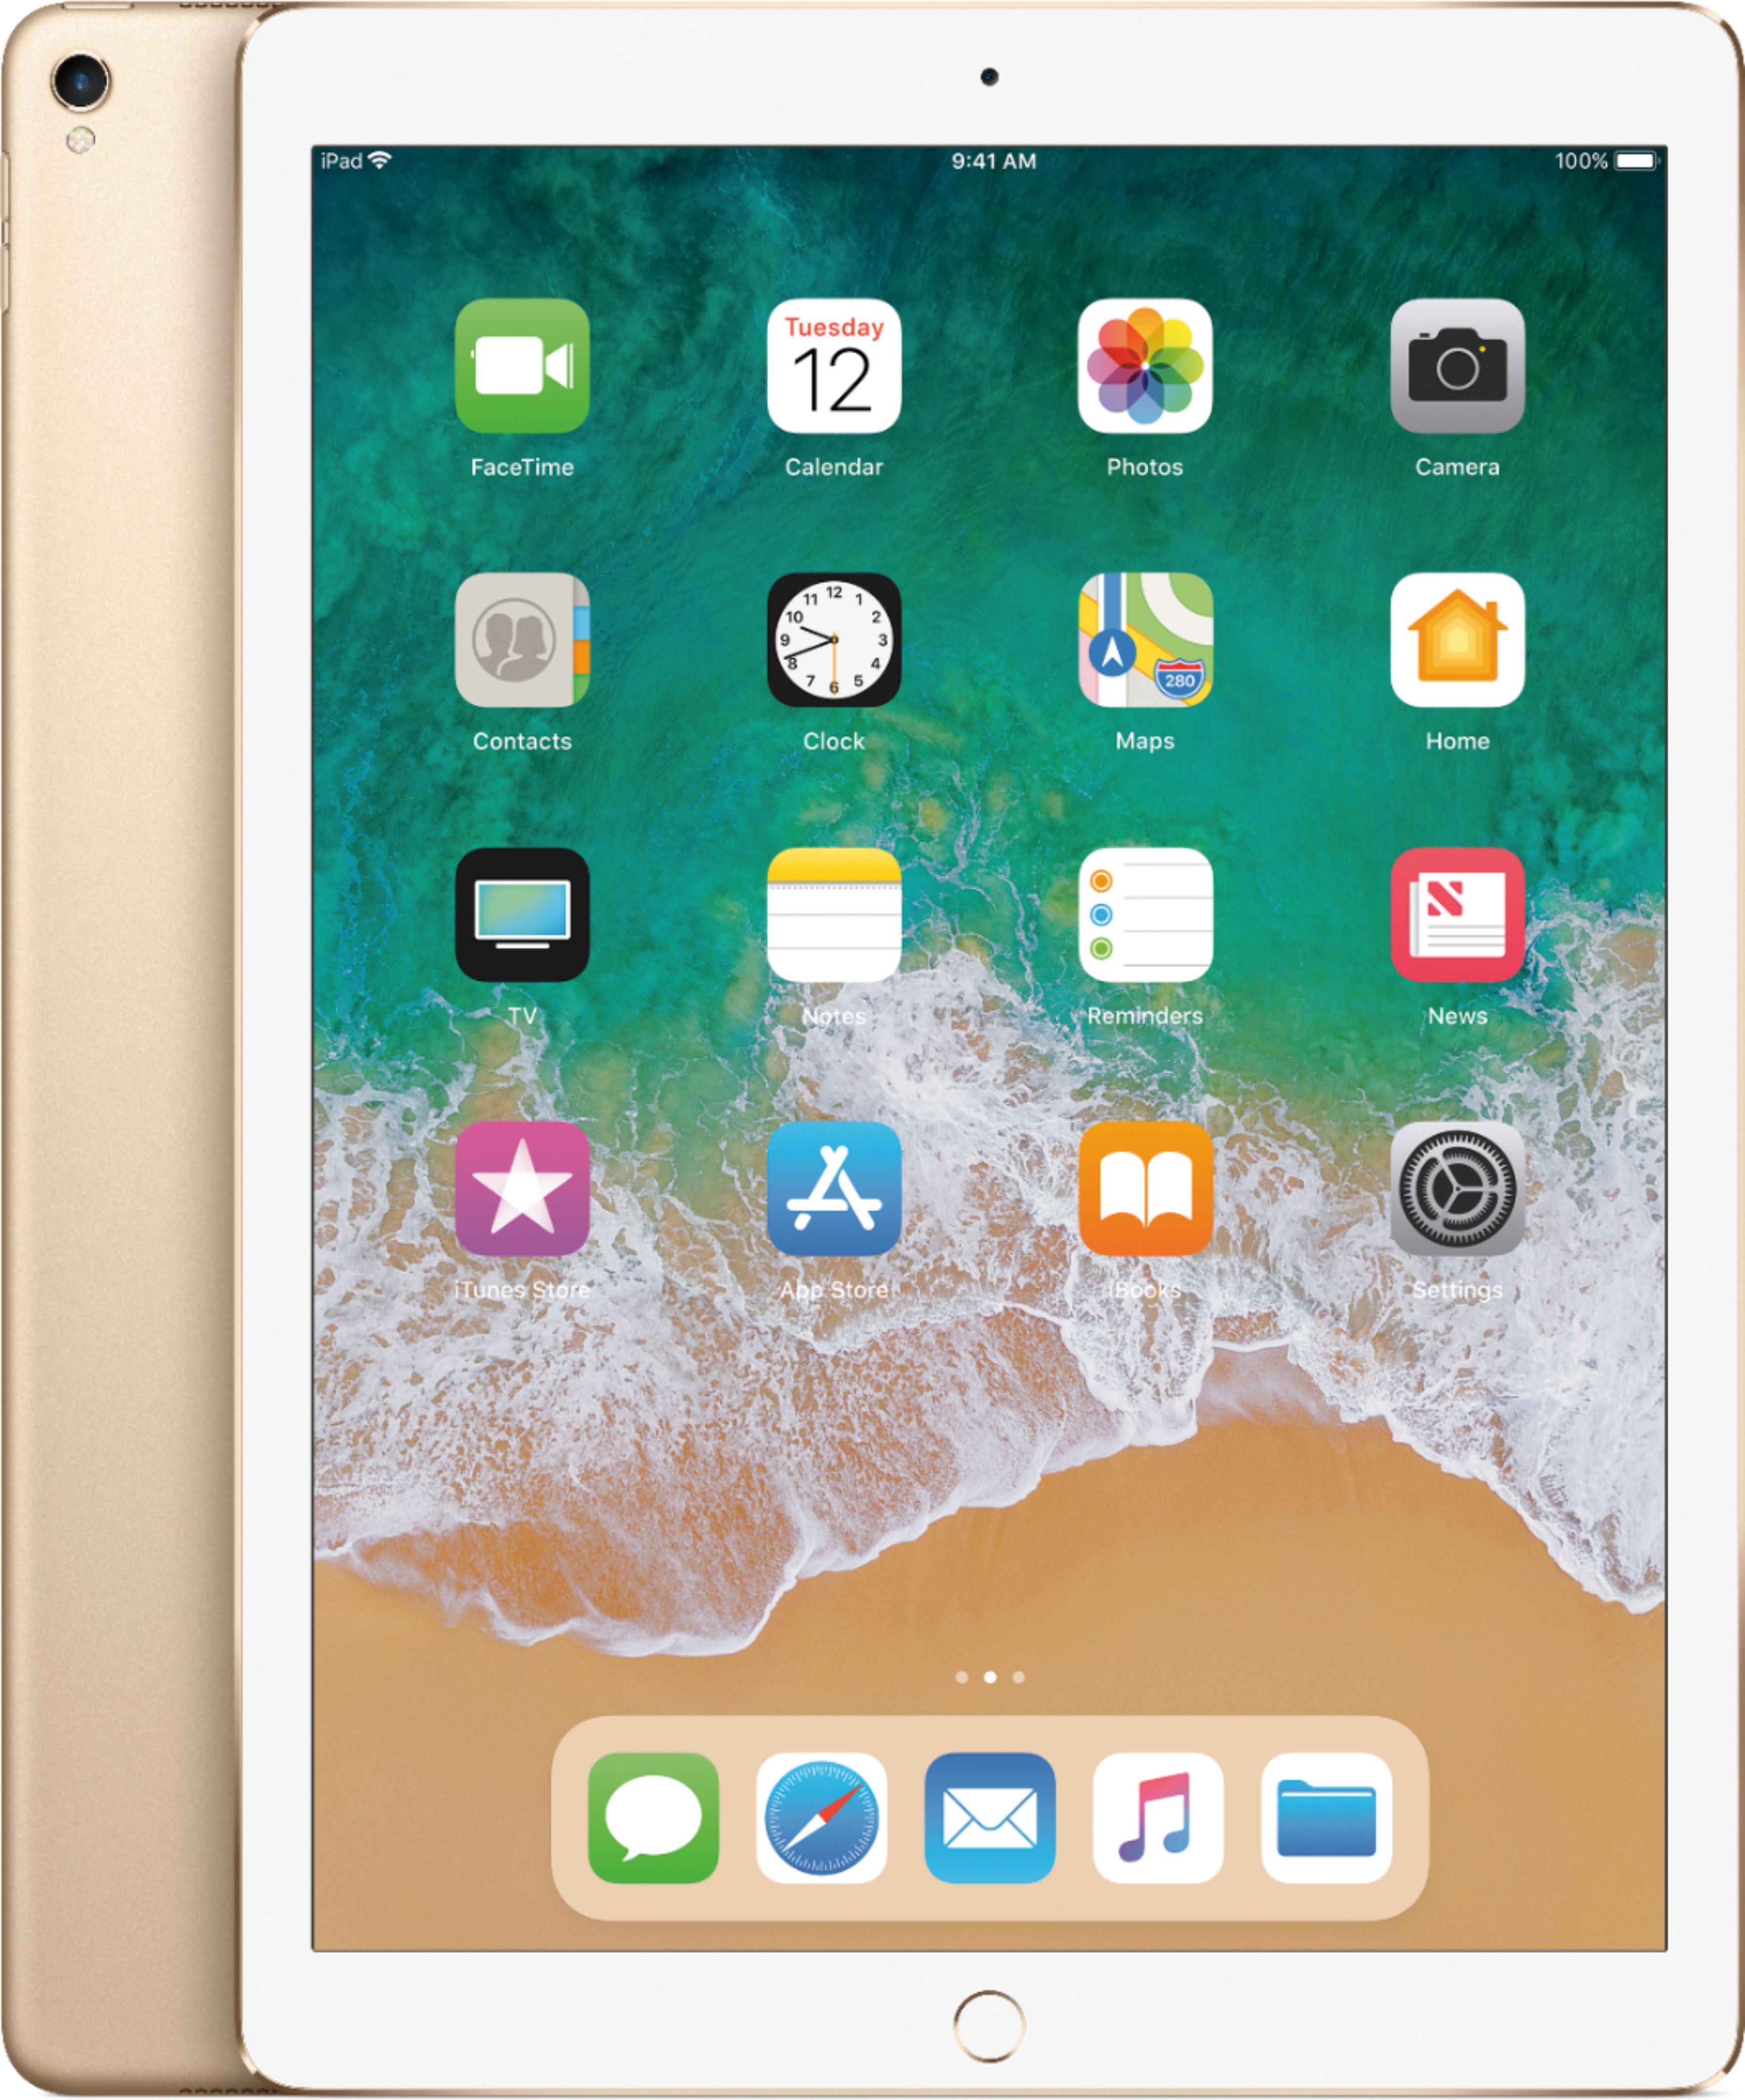 Apple iPad Pro 12.9-inch (2nd Wi-Fi 256 generation) Best + MPA62LL/A - Gold GB Buy Cellular with